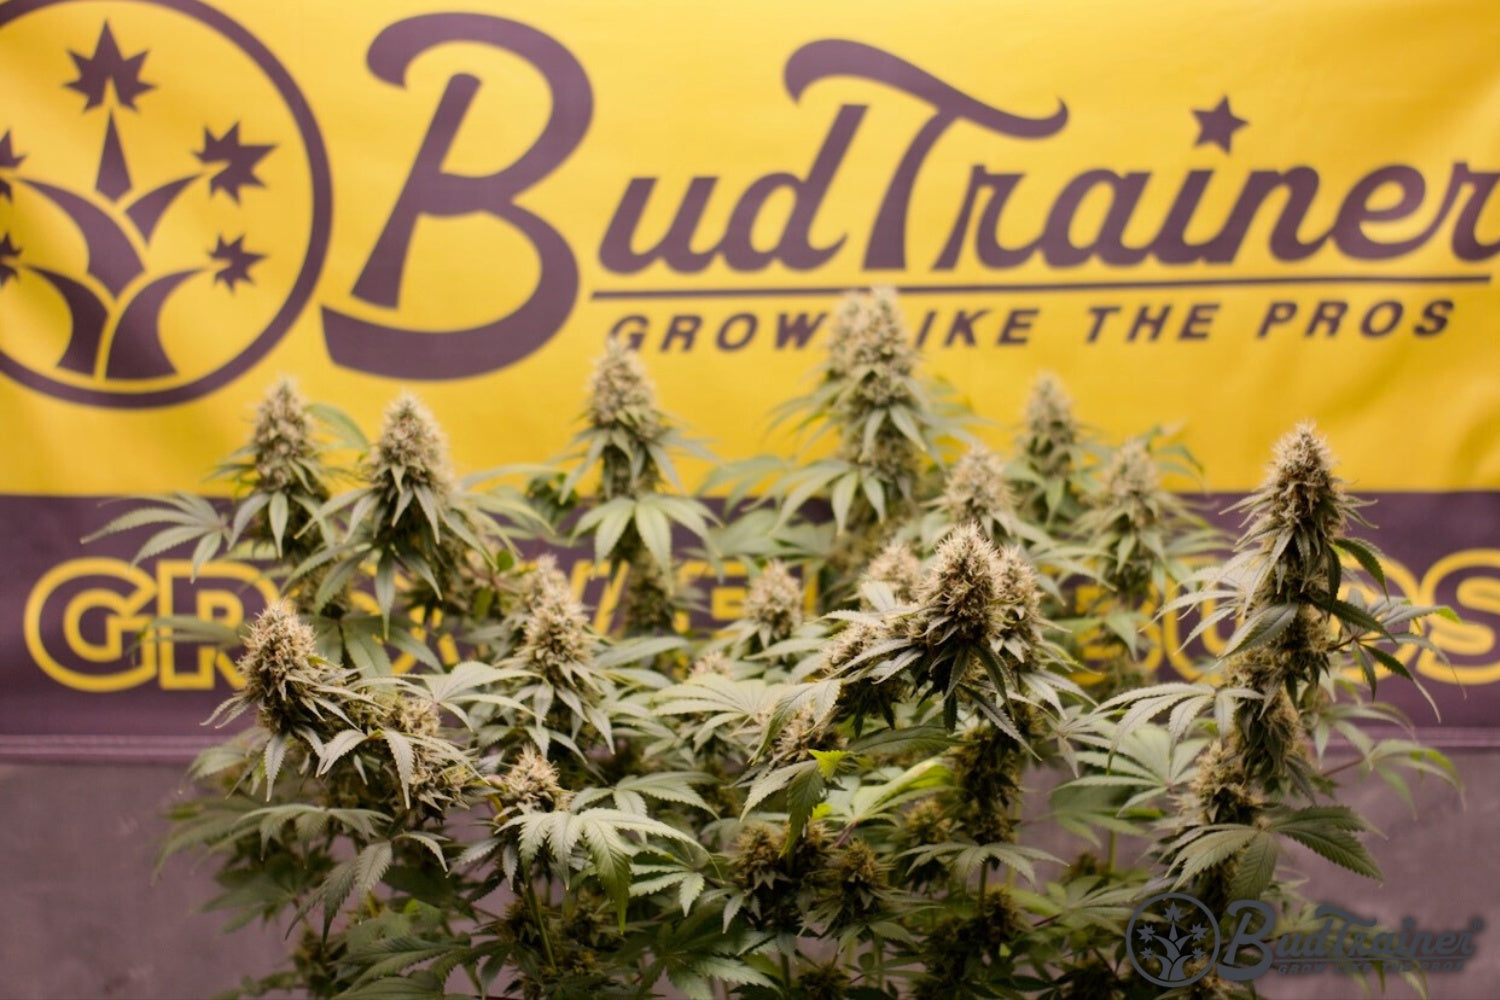 Multiple cannabis plants with mature buds growing under indoor conditions, with a yellow and purple ‘BudTrainer’ banner in the background.